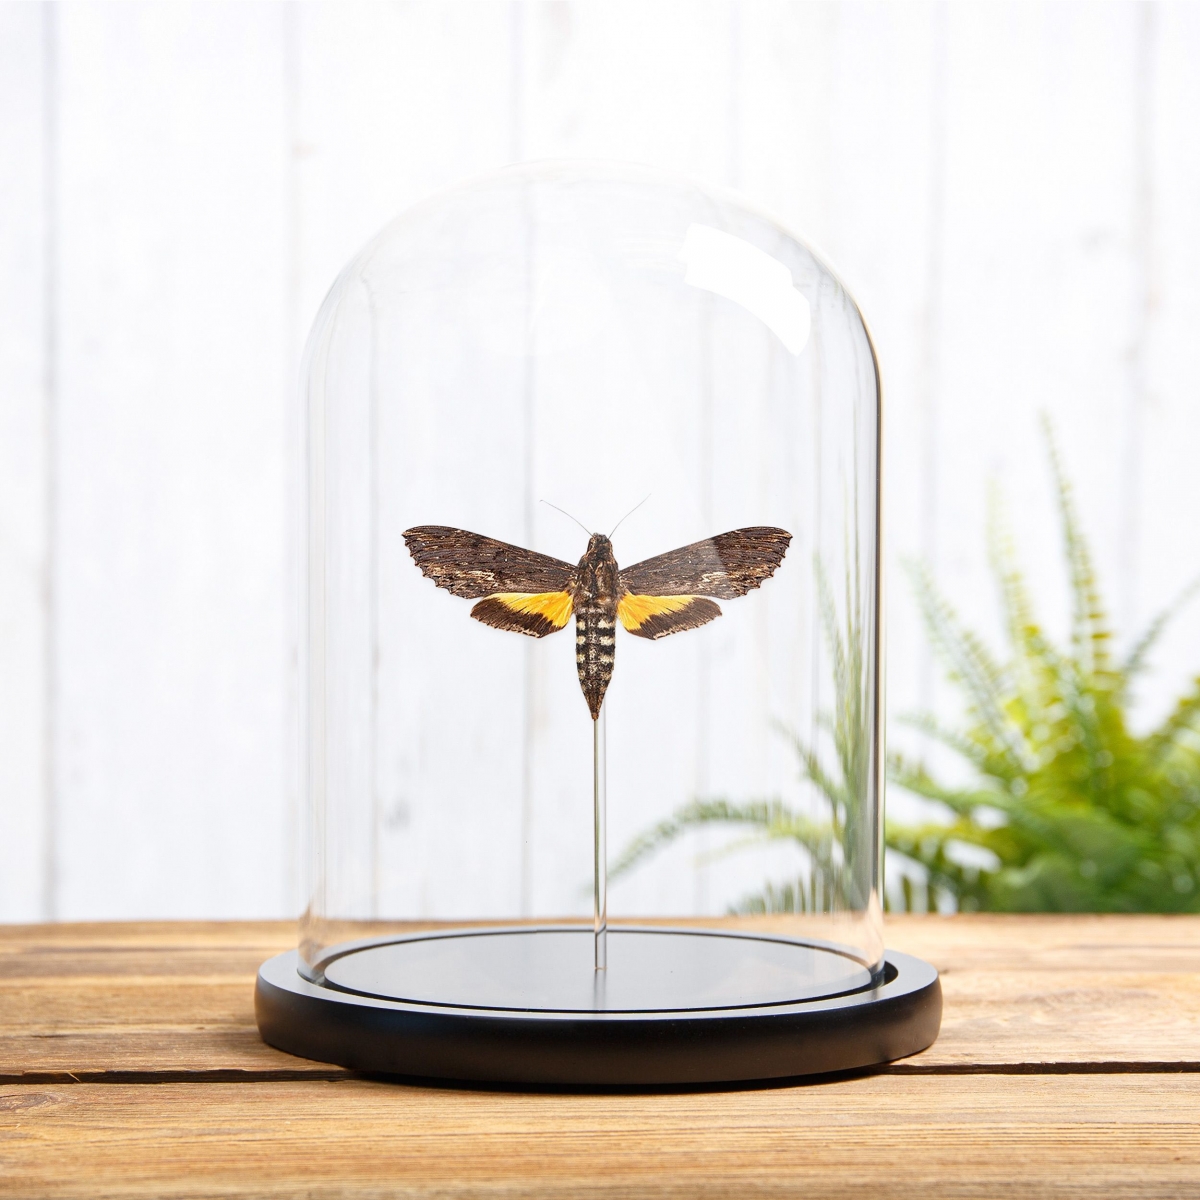 Minibeast Rimosus Sphinx in Glass Dome with Wooden Base (Isognathus rimosa)